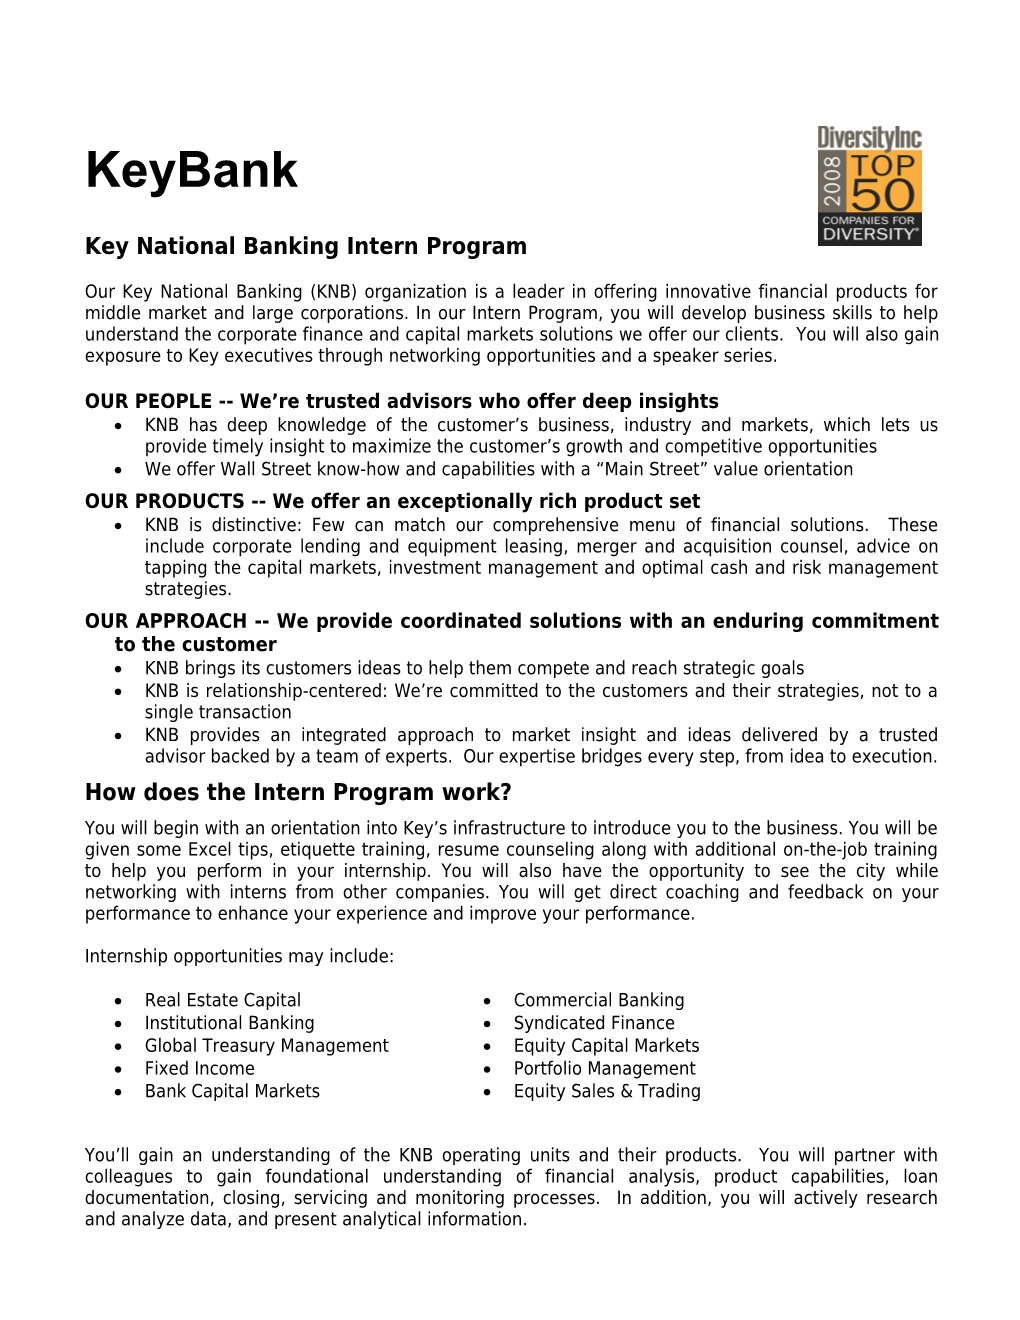 Key Corporate and Investment Banking Analyst Program